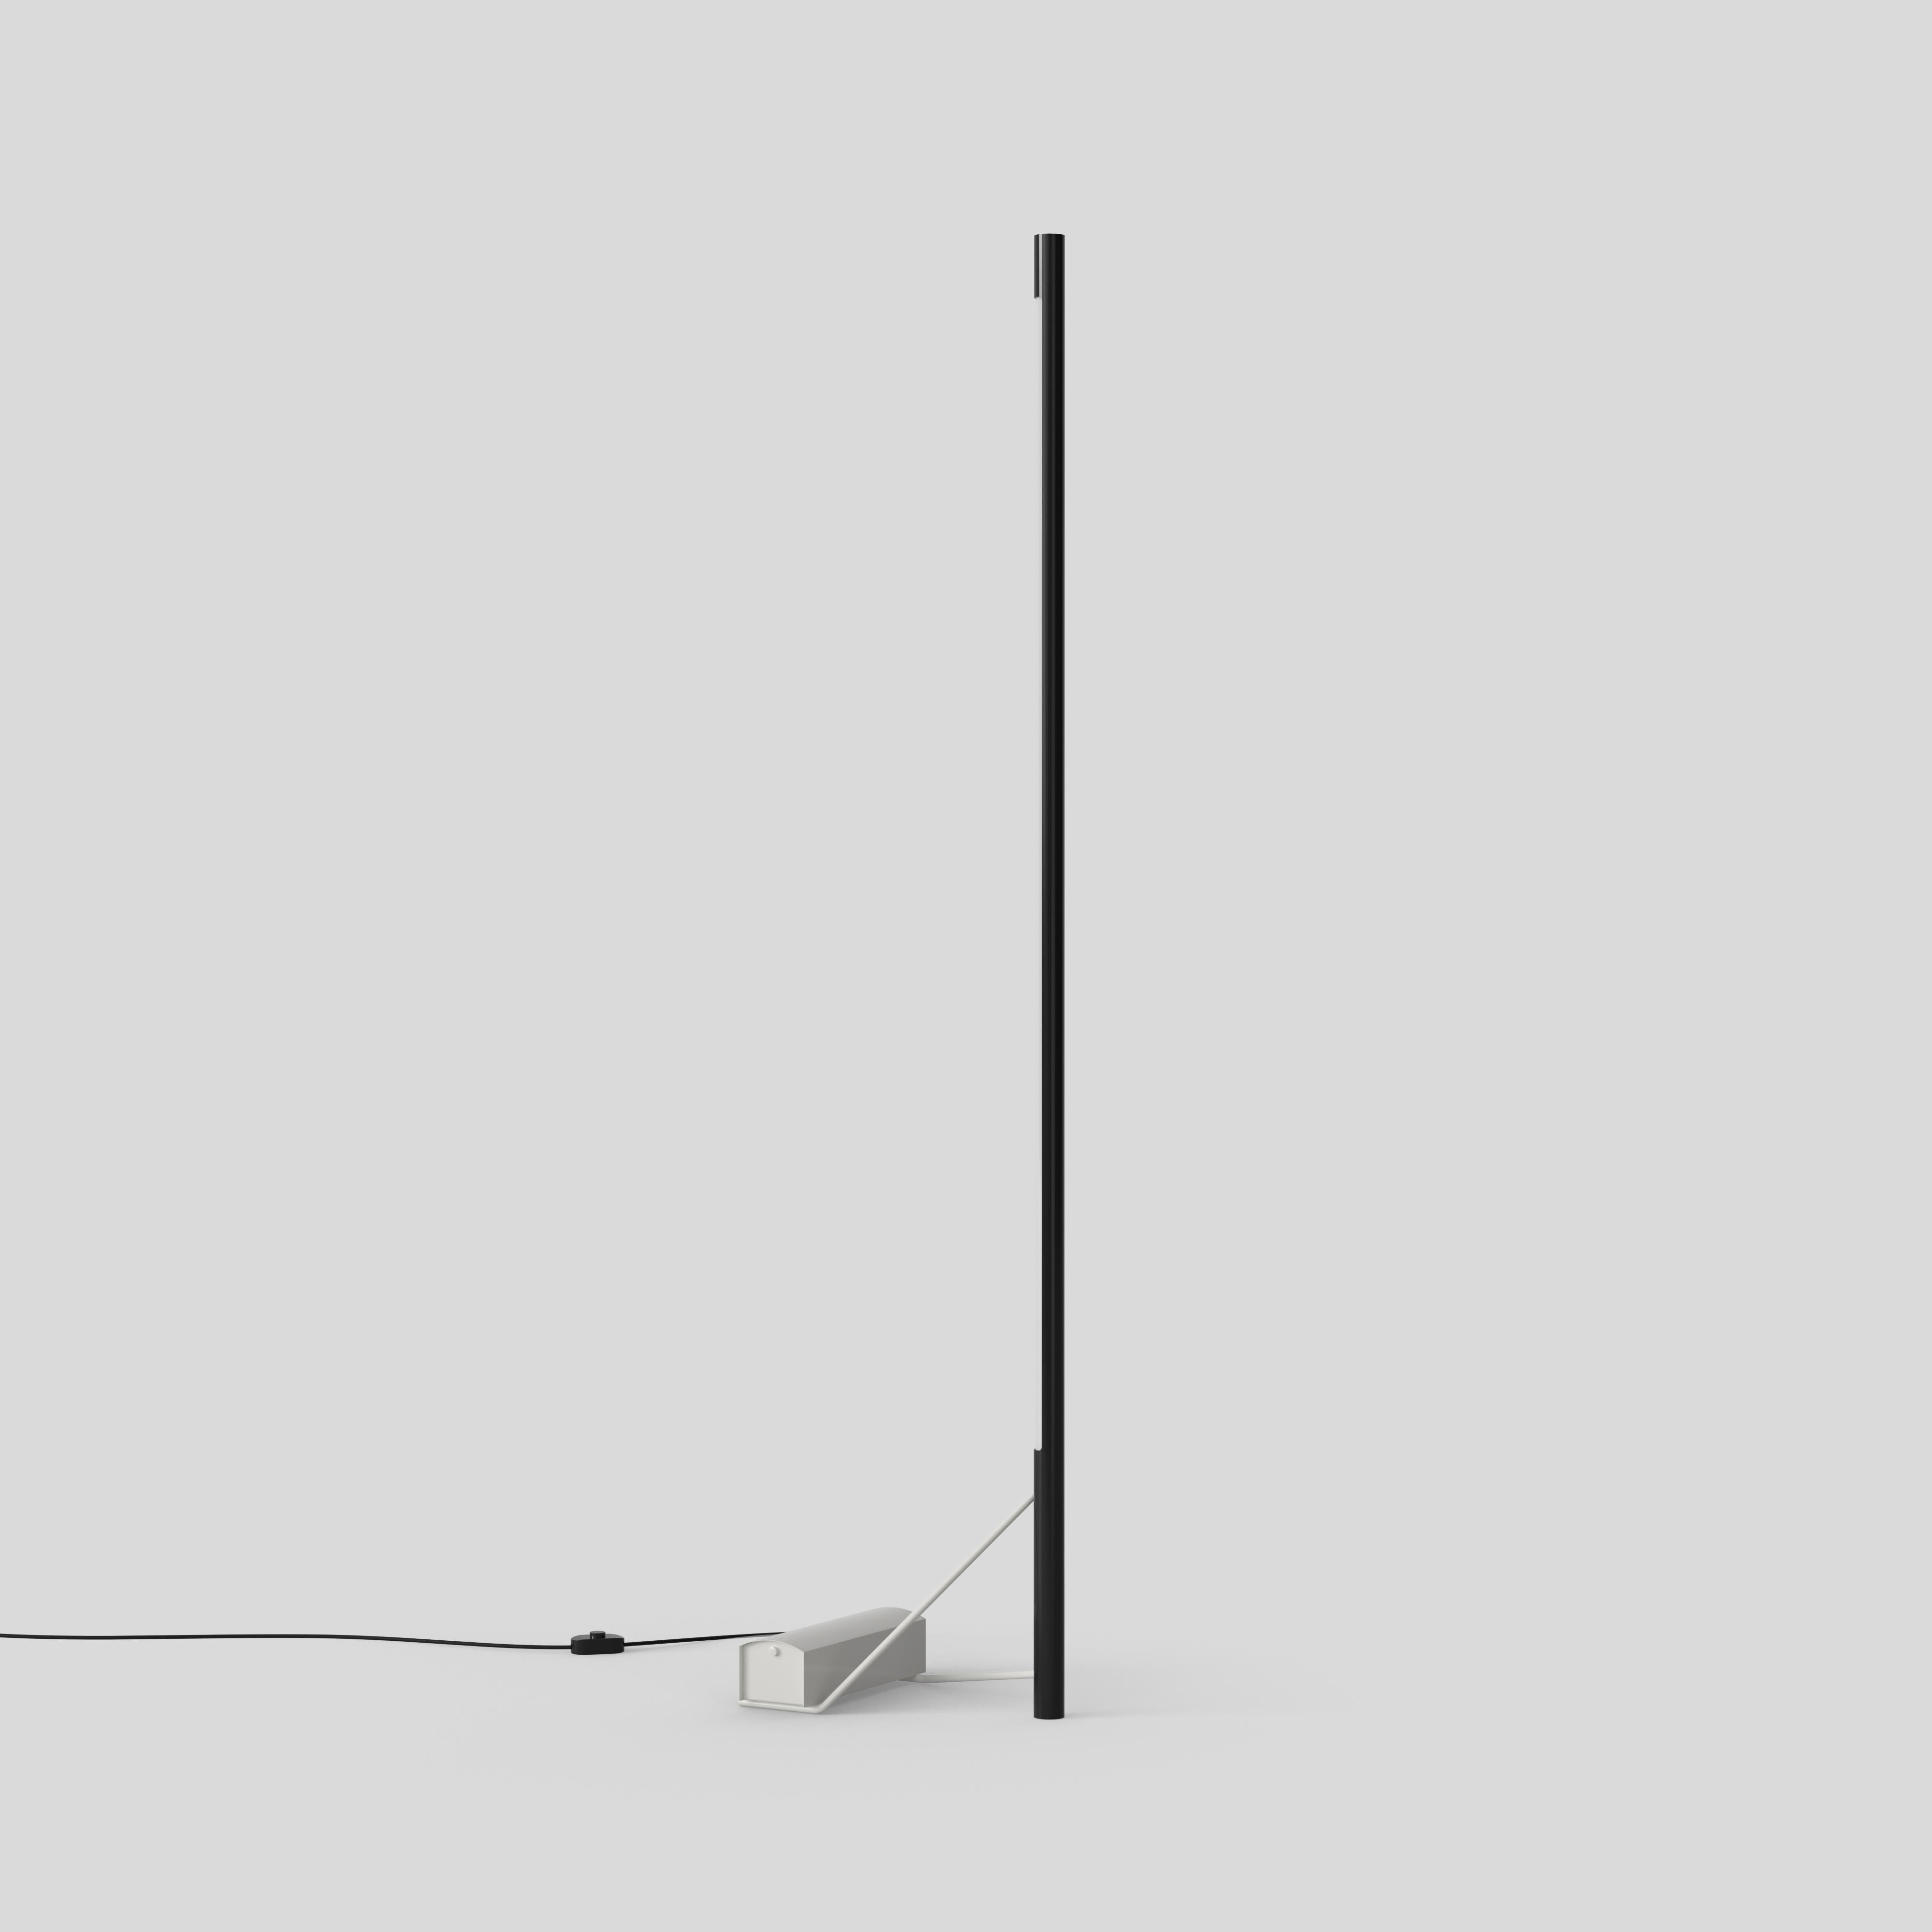 Model 1063
Design by Gino Sarfatti
The floor lamp designed in 1954 was a true avant-garde design at the time, and with its minimalistic silhouette, it continues to complement even the most modern setting. In Model 1063, Gino Sarfatti seeks to